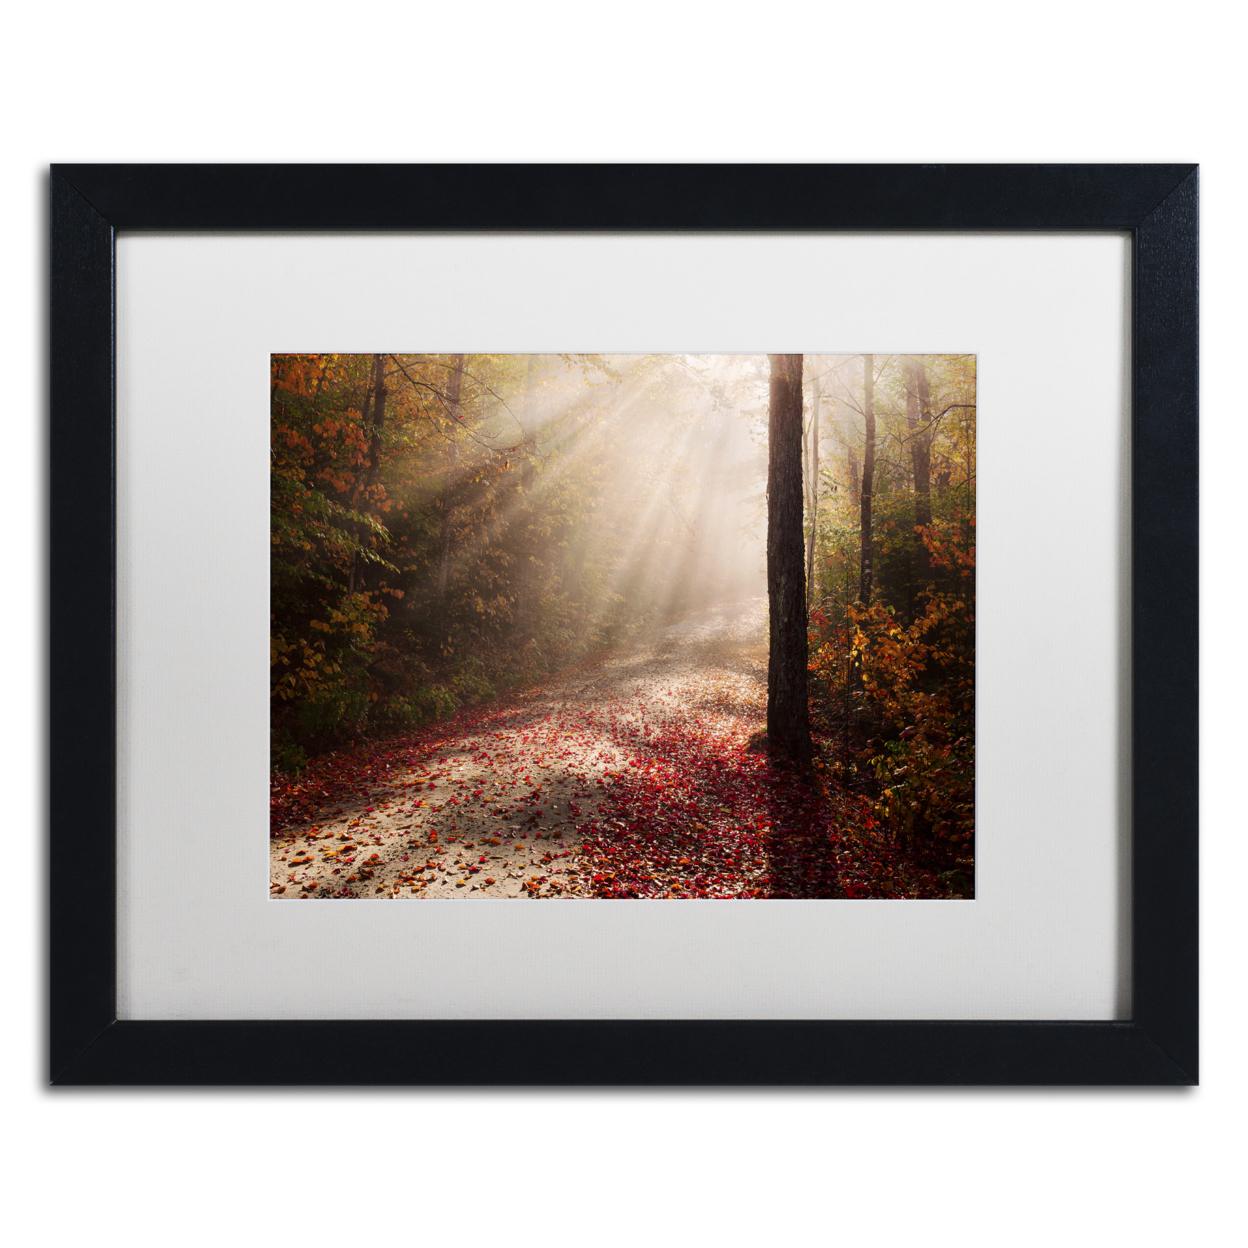 Michael Blanchette Photography 'Light In The Forest' Black Wooden Framed Art 18 X 22 Inches